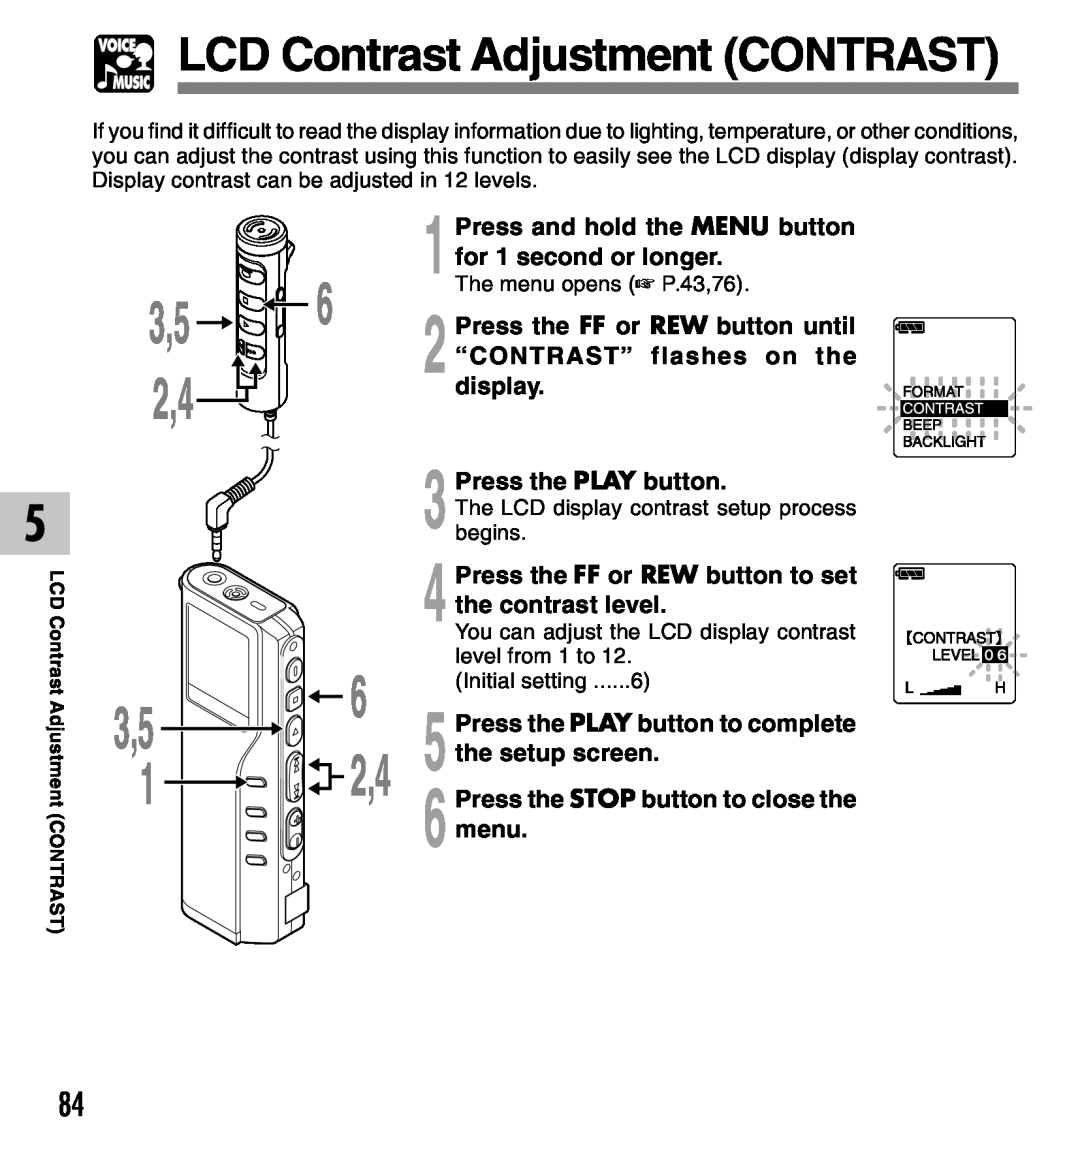 Olympus DM-10 LCD Contrast Adjustment CONTRAST, 2 “CONTRAST” flashes on the, Press the FF or REW button to set, display 